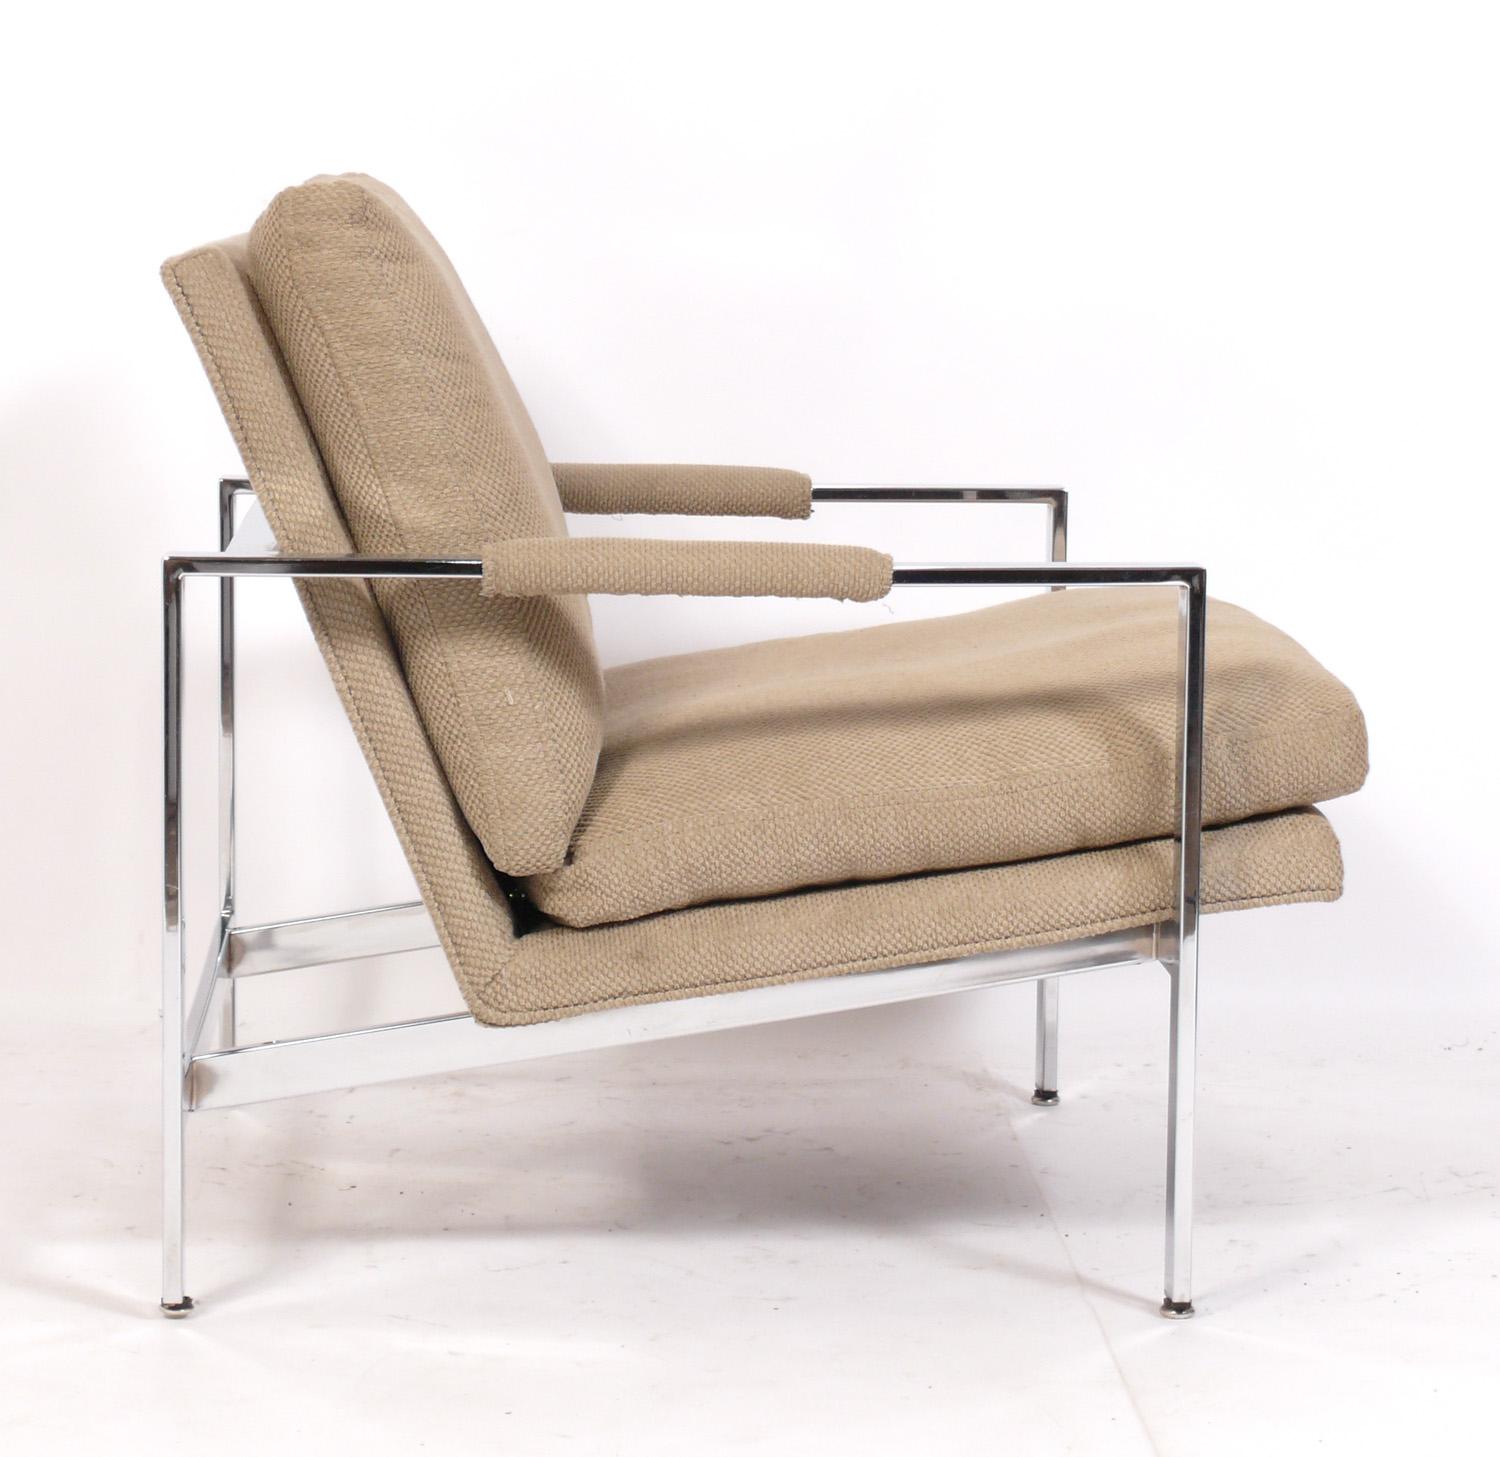 Clean Lined Chrome Mid Century Lounge Chairs, designed by Milo Baughman for Thayer Coggin, American, circa 1960s. These chairs are currently being reupholstered and can be completed in your fabric. SImply send us 10 yards of your fabric after